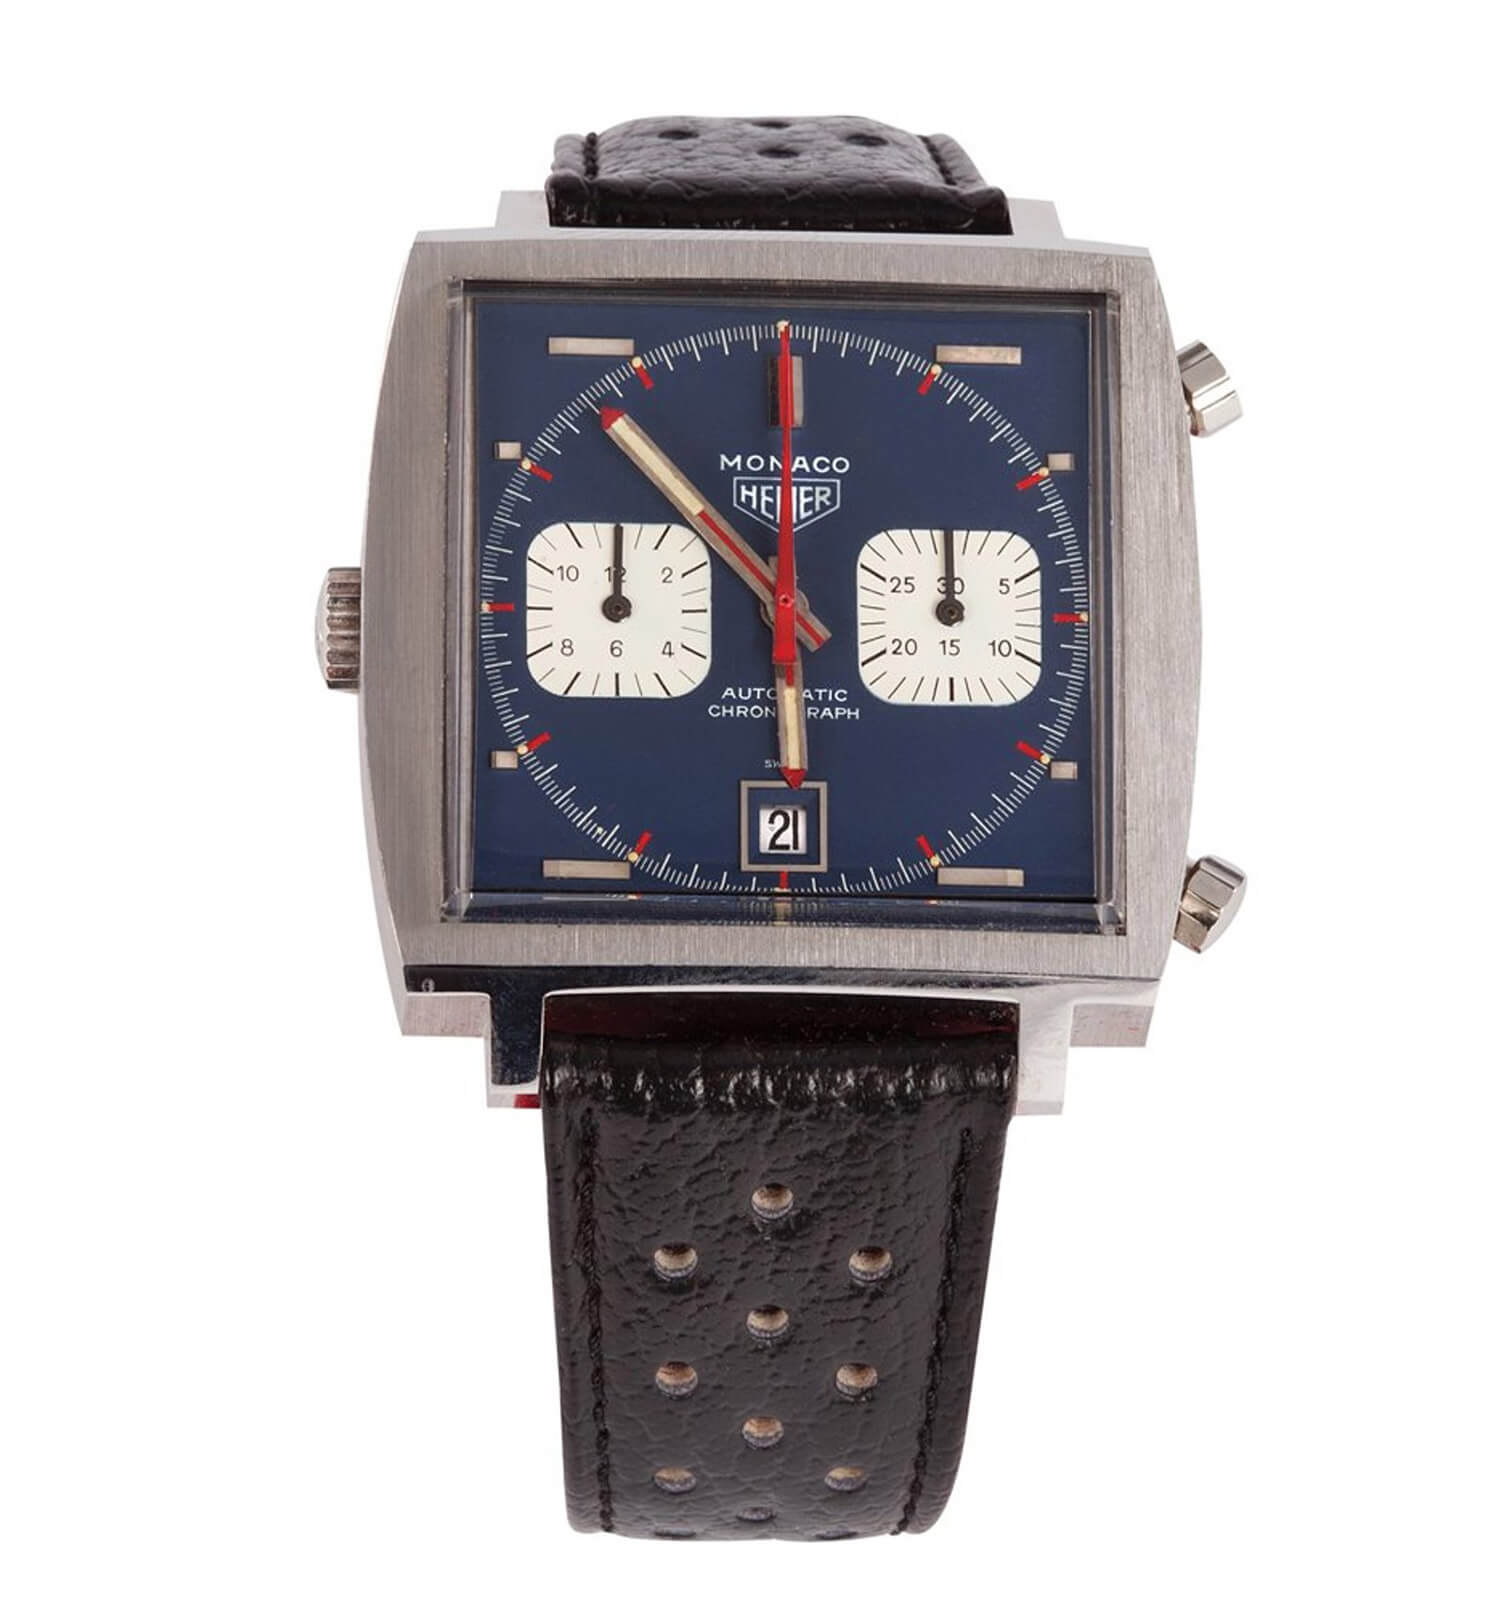 Steve McQueen Heuer Monaco from the 2012 Profiles in History auction (photo courtesy onthedash.com)